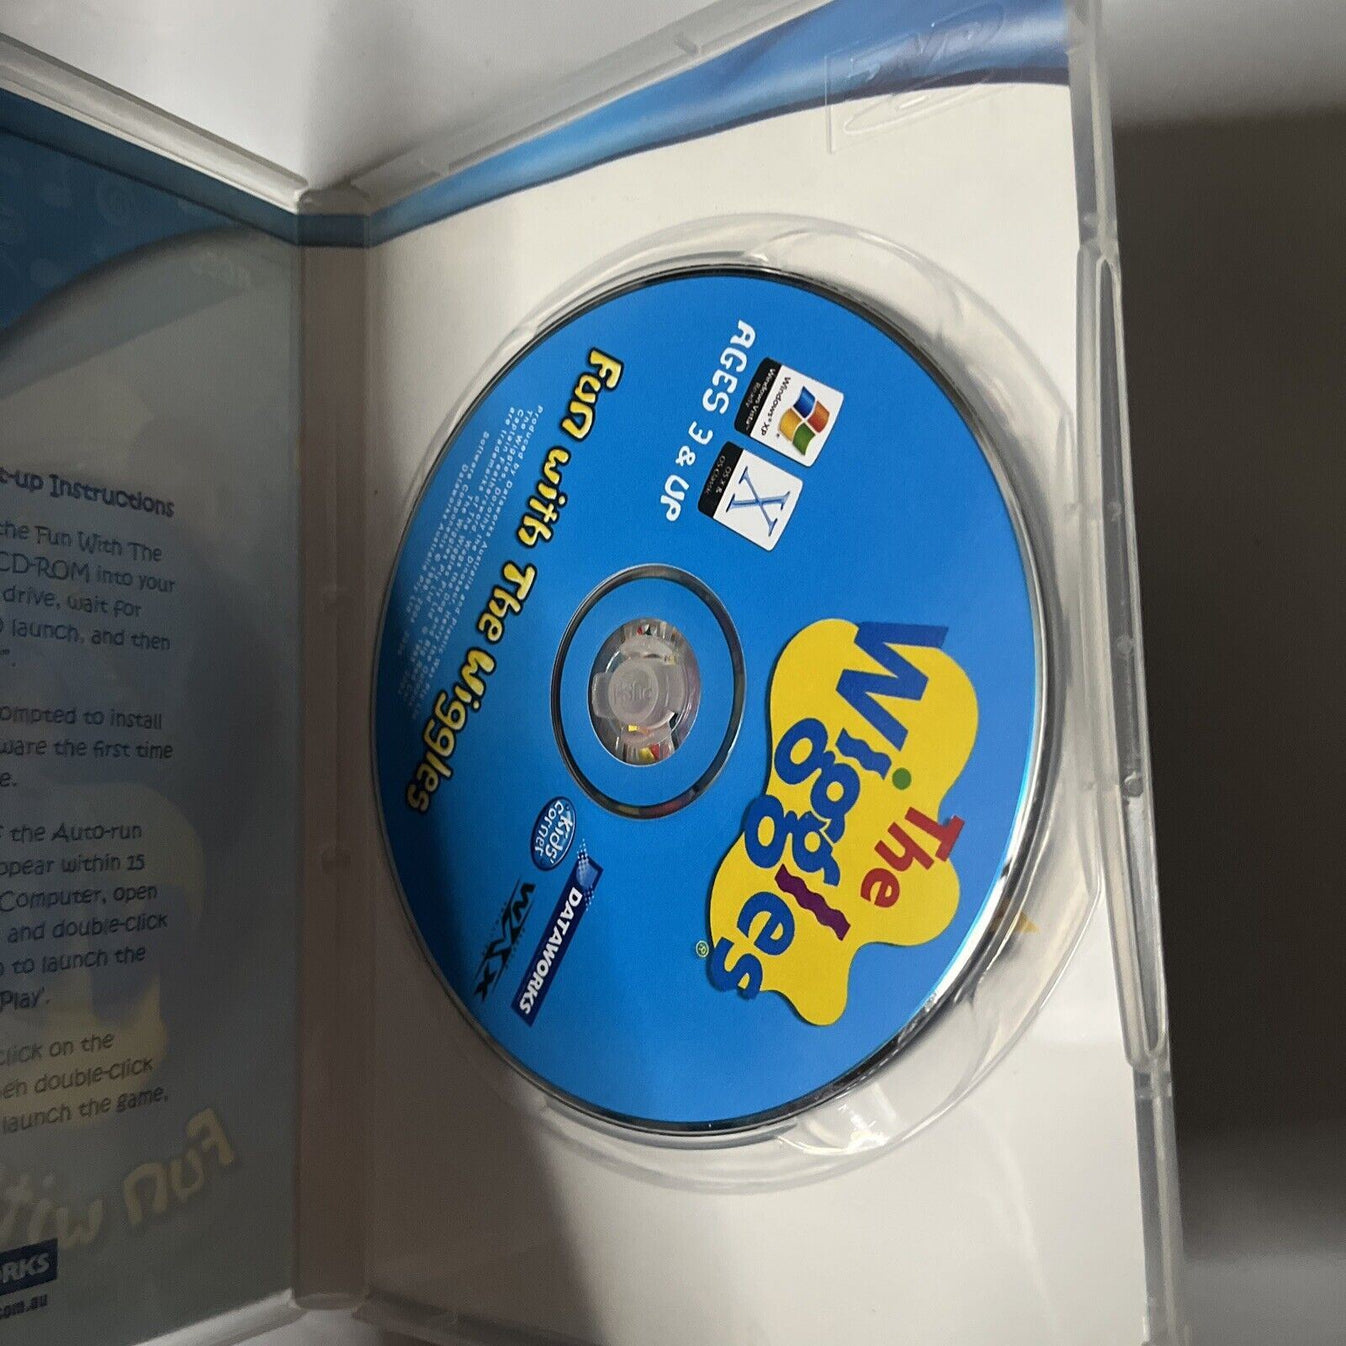 The Wiggles - Fun With The Wiggles PC Mac CD-ROM Game – Retro Unit